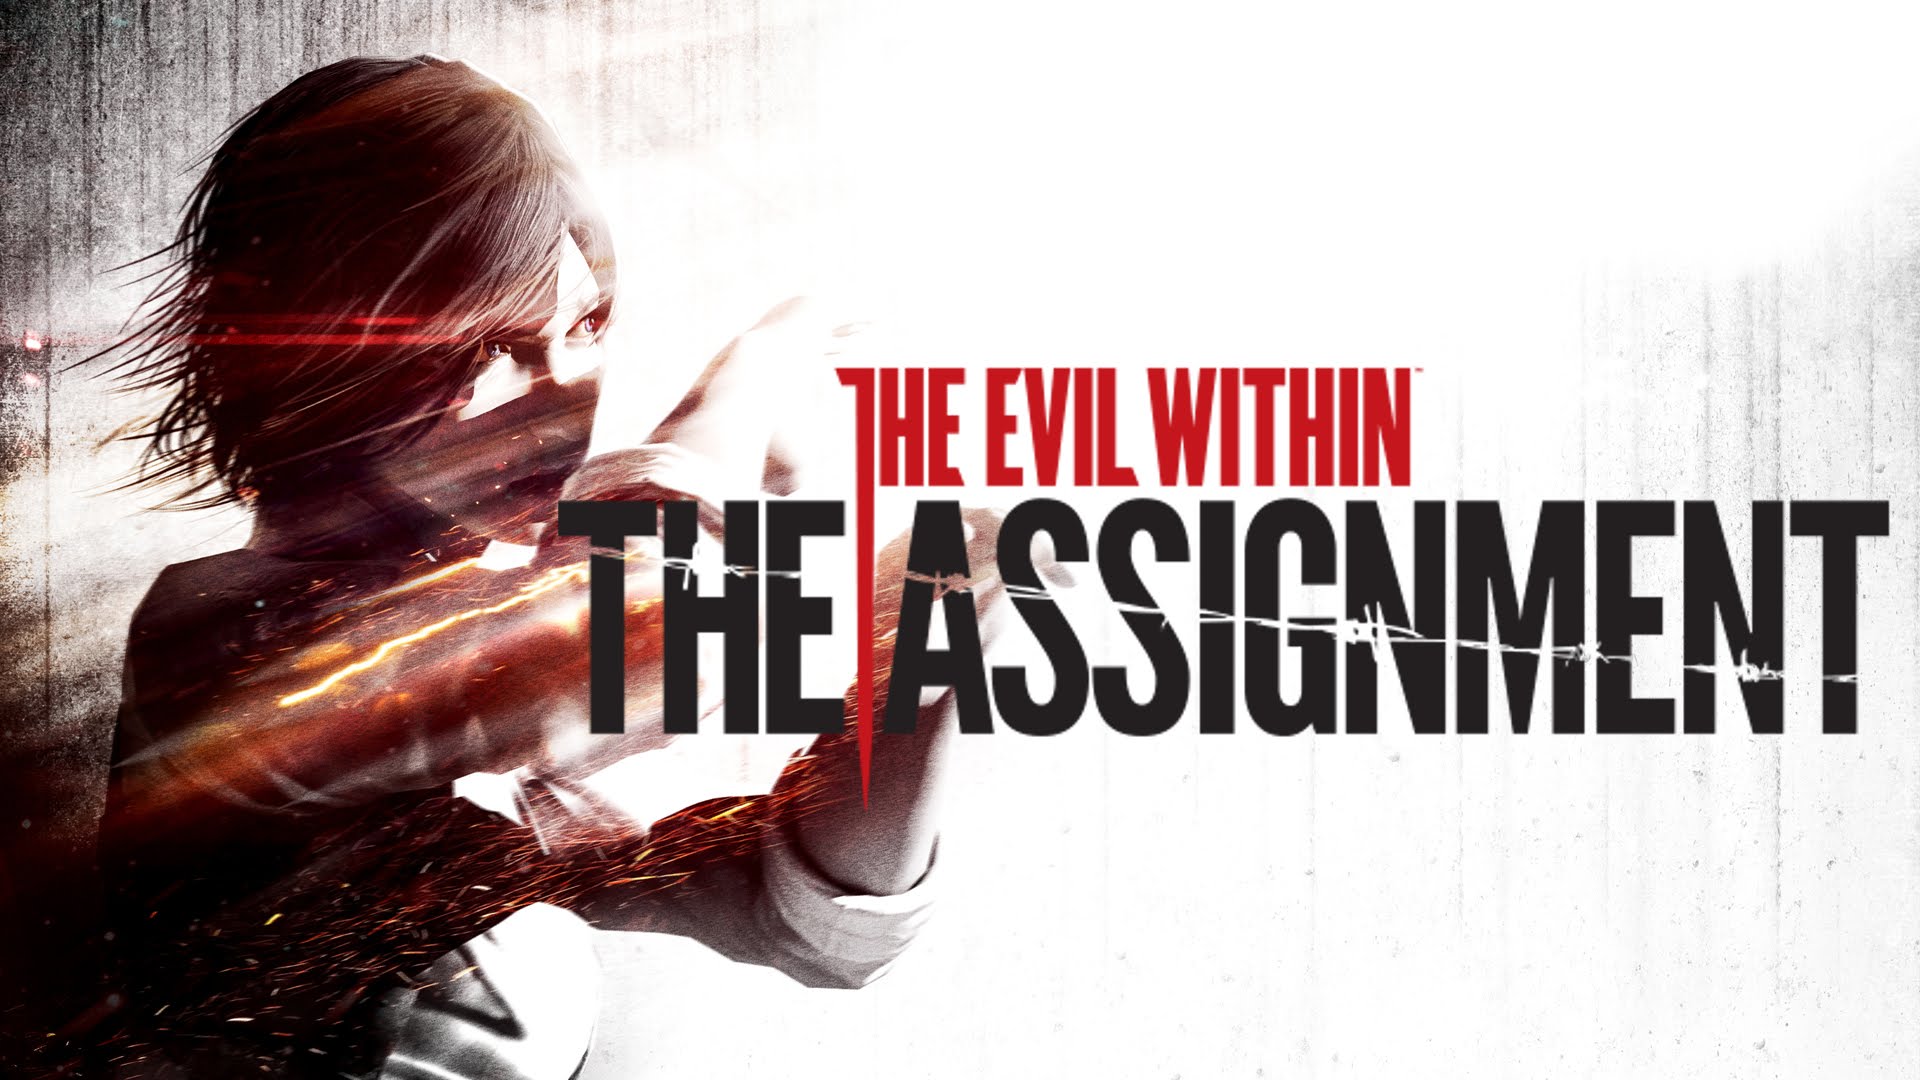 the evil within the assignment trainer